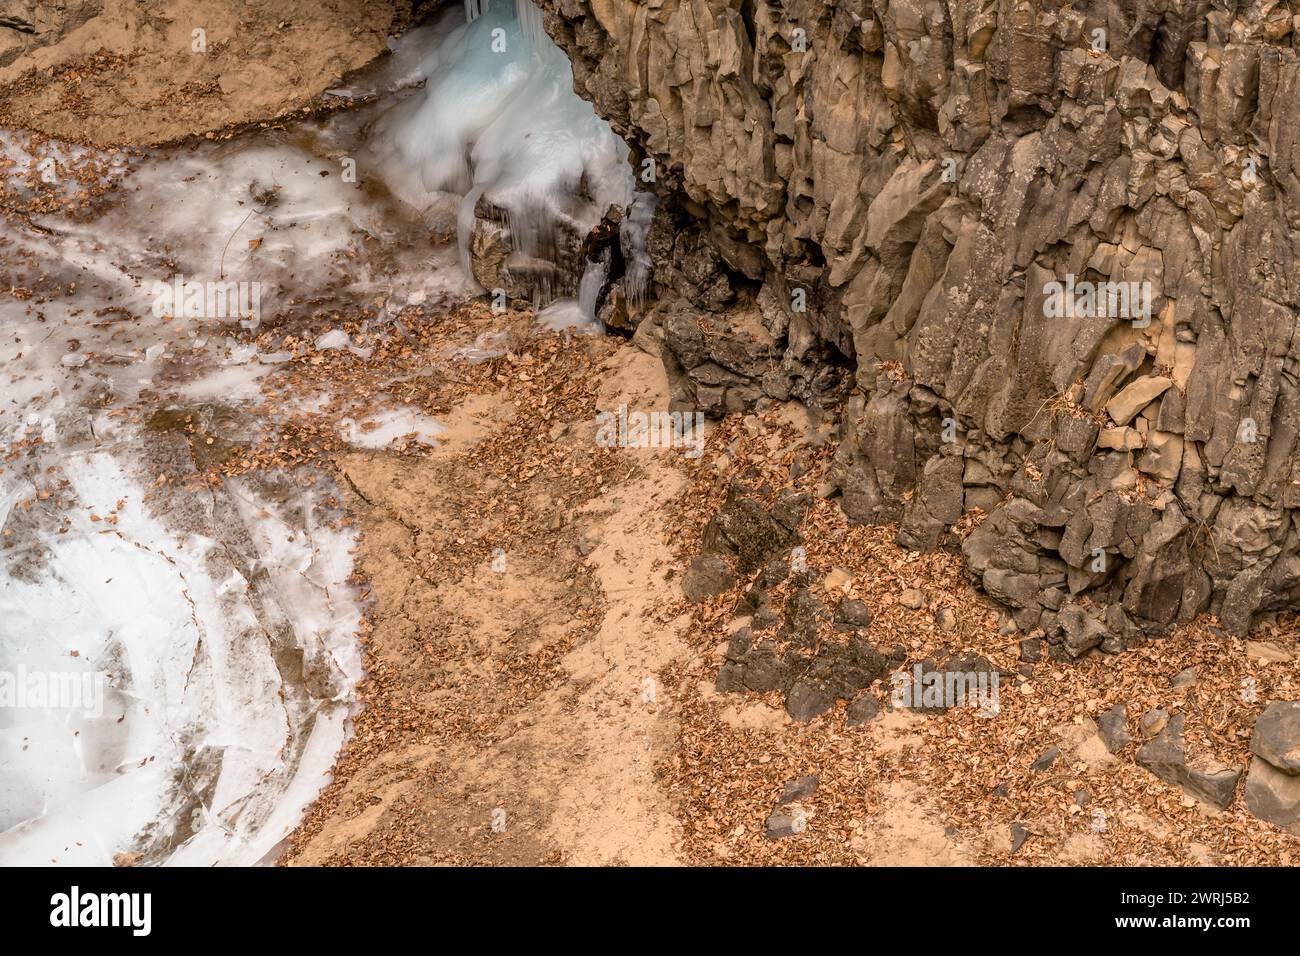 View of bottom of crater with ice flow and edge of frozen pond in Gyeonggi province of South Korea Stock Photo